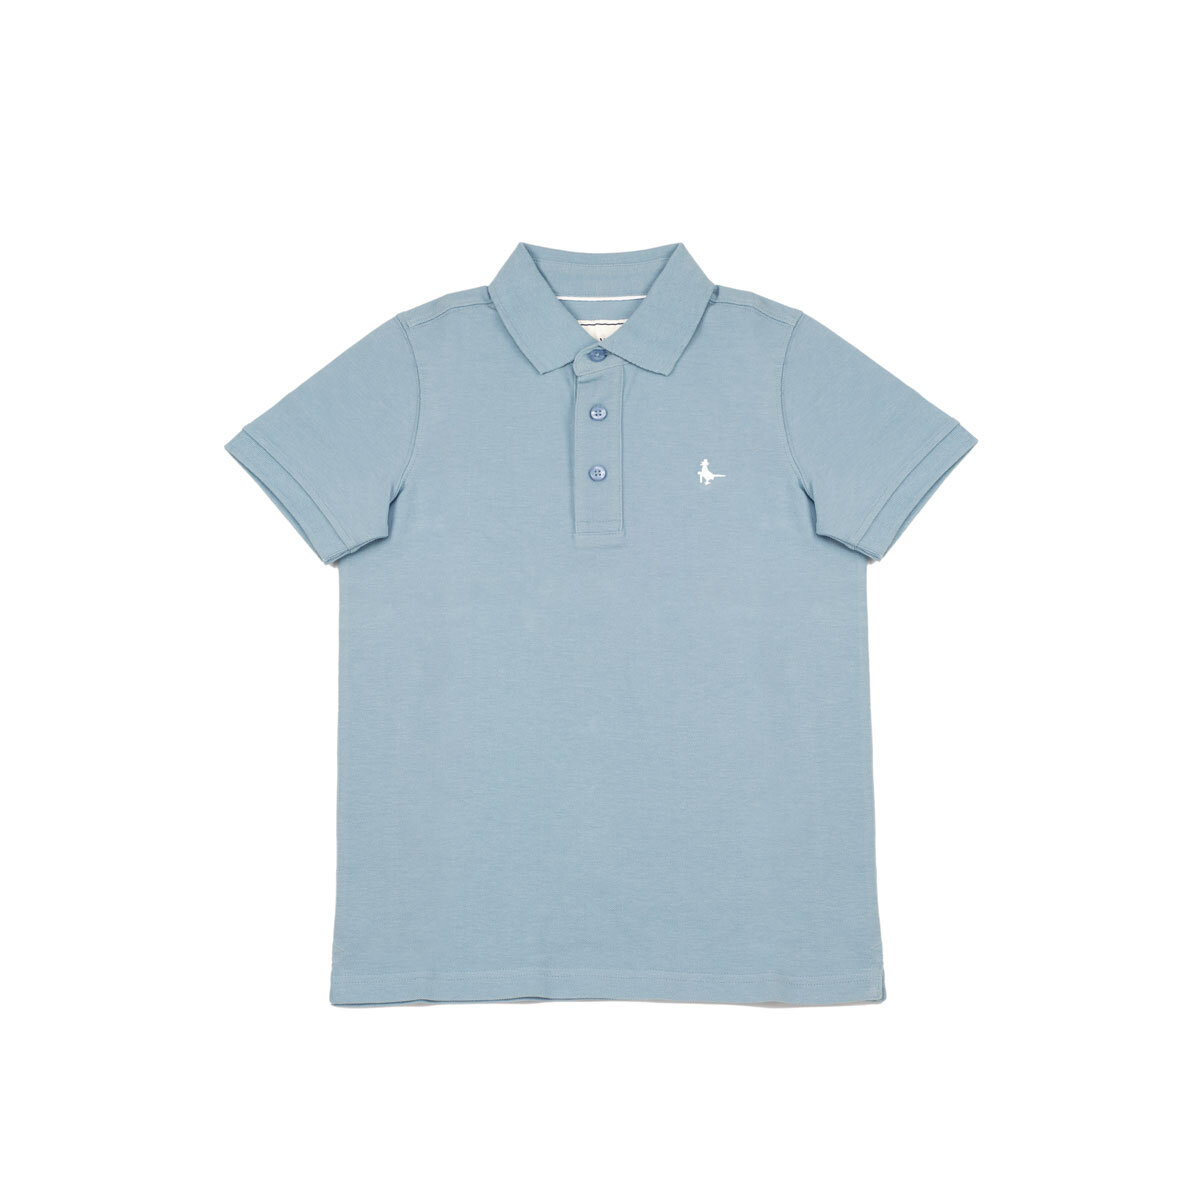 Jack Wills Youth Polo in Blue